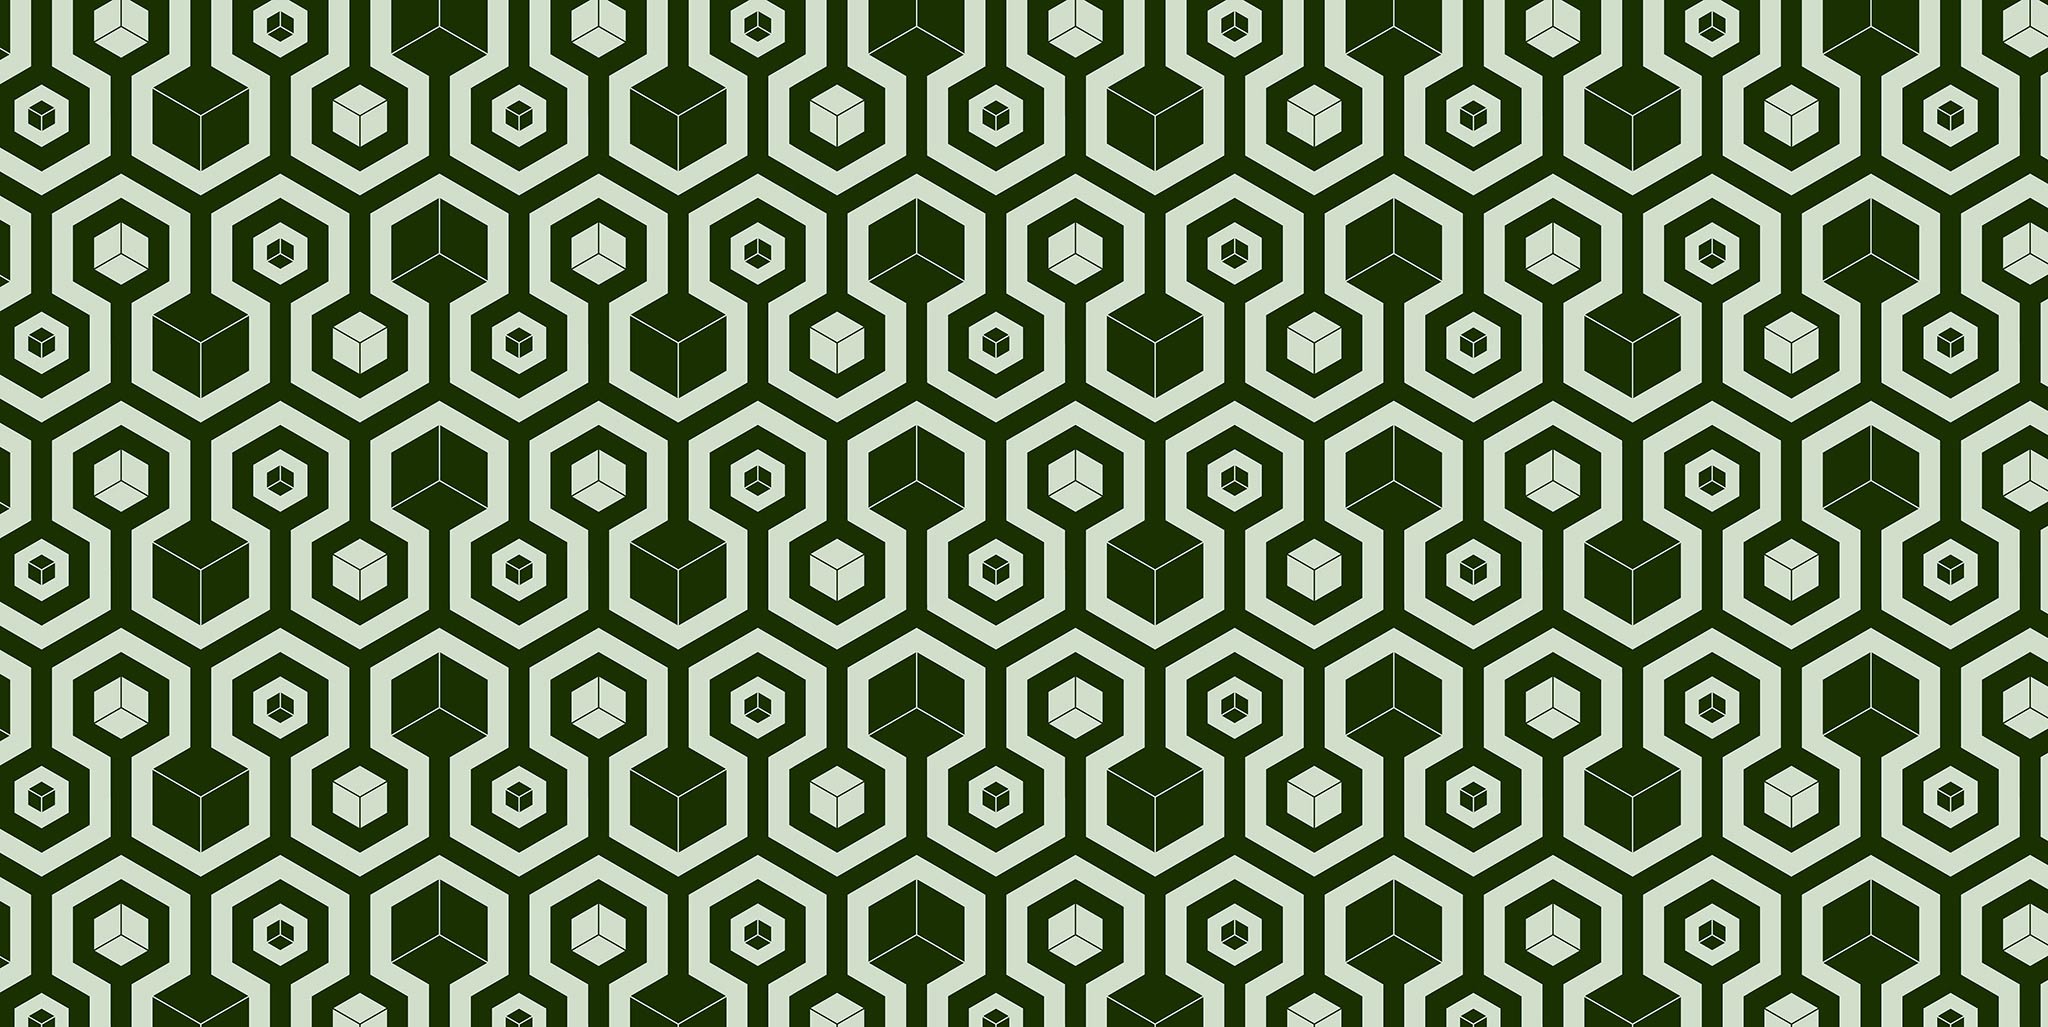 Wallpaper edition for The Square Roots, from The Fractal Architectures series